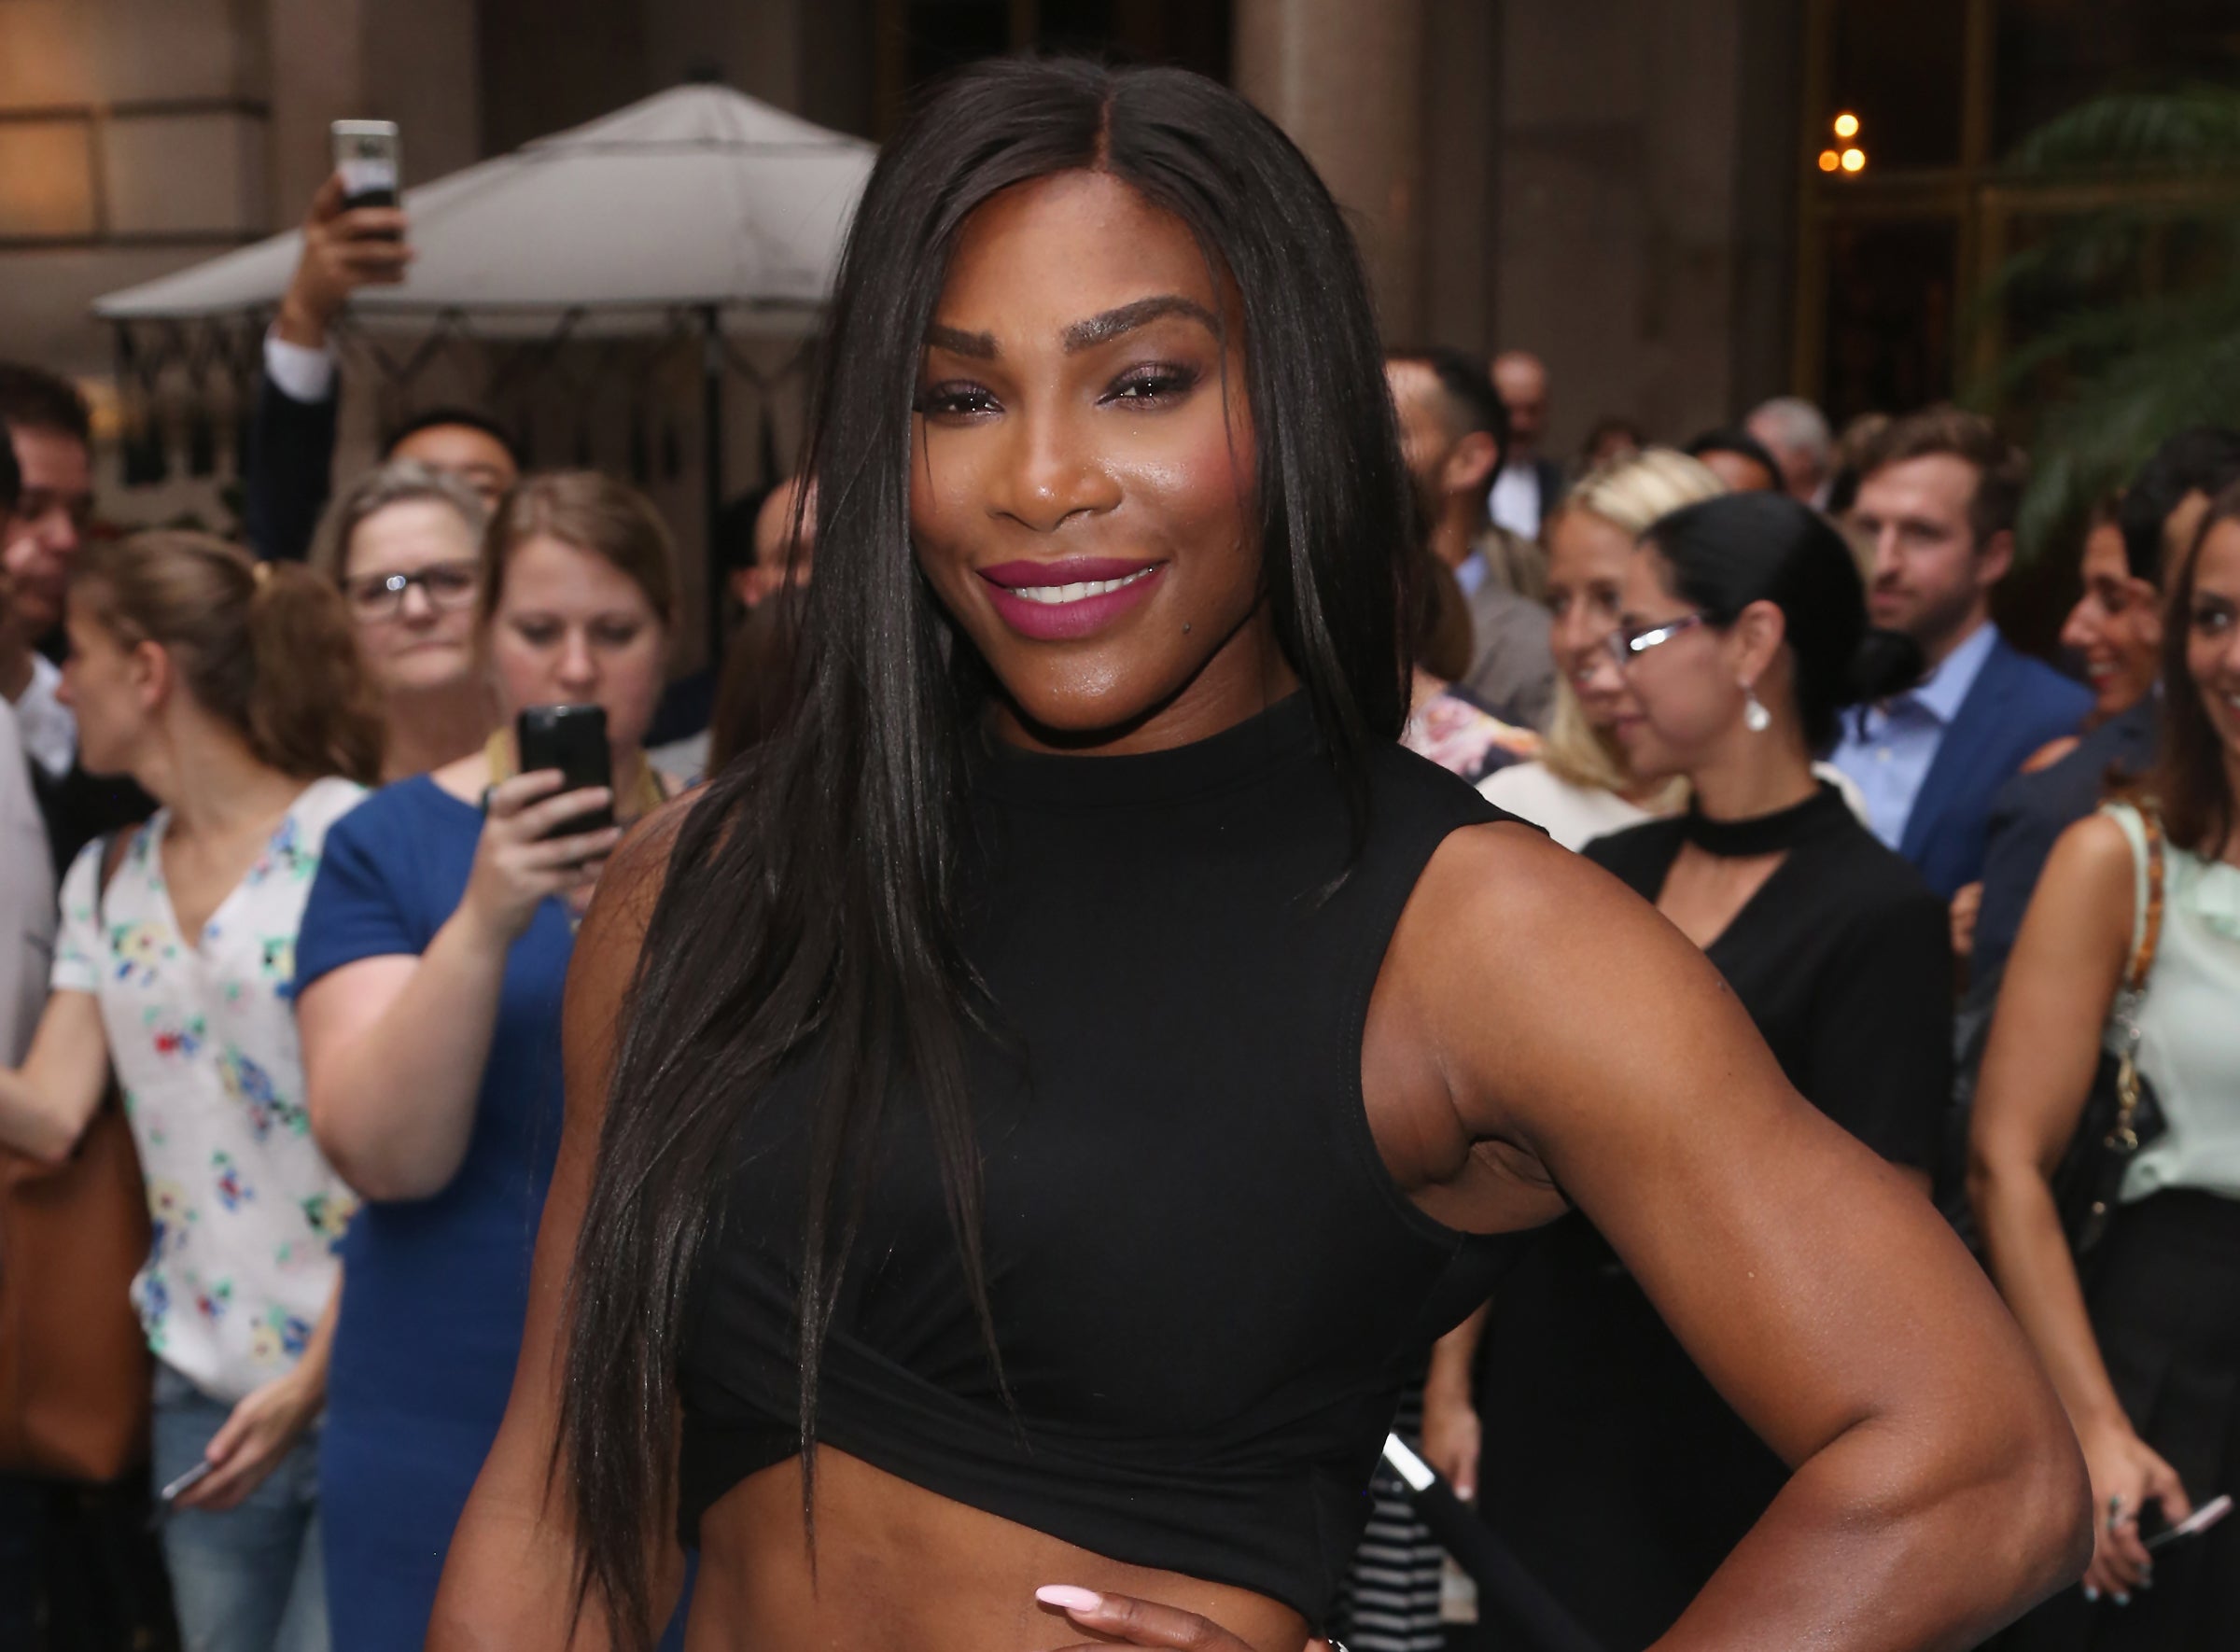 Serena Williams Showcases Her Engagement Ring in Reddit Post with Fiancé Alexis Ohanian
